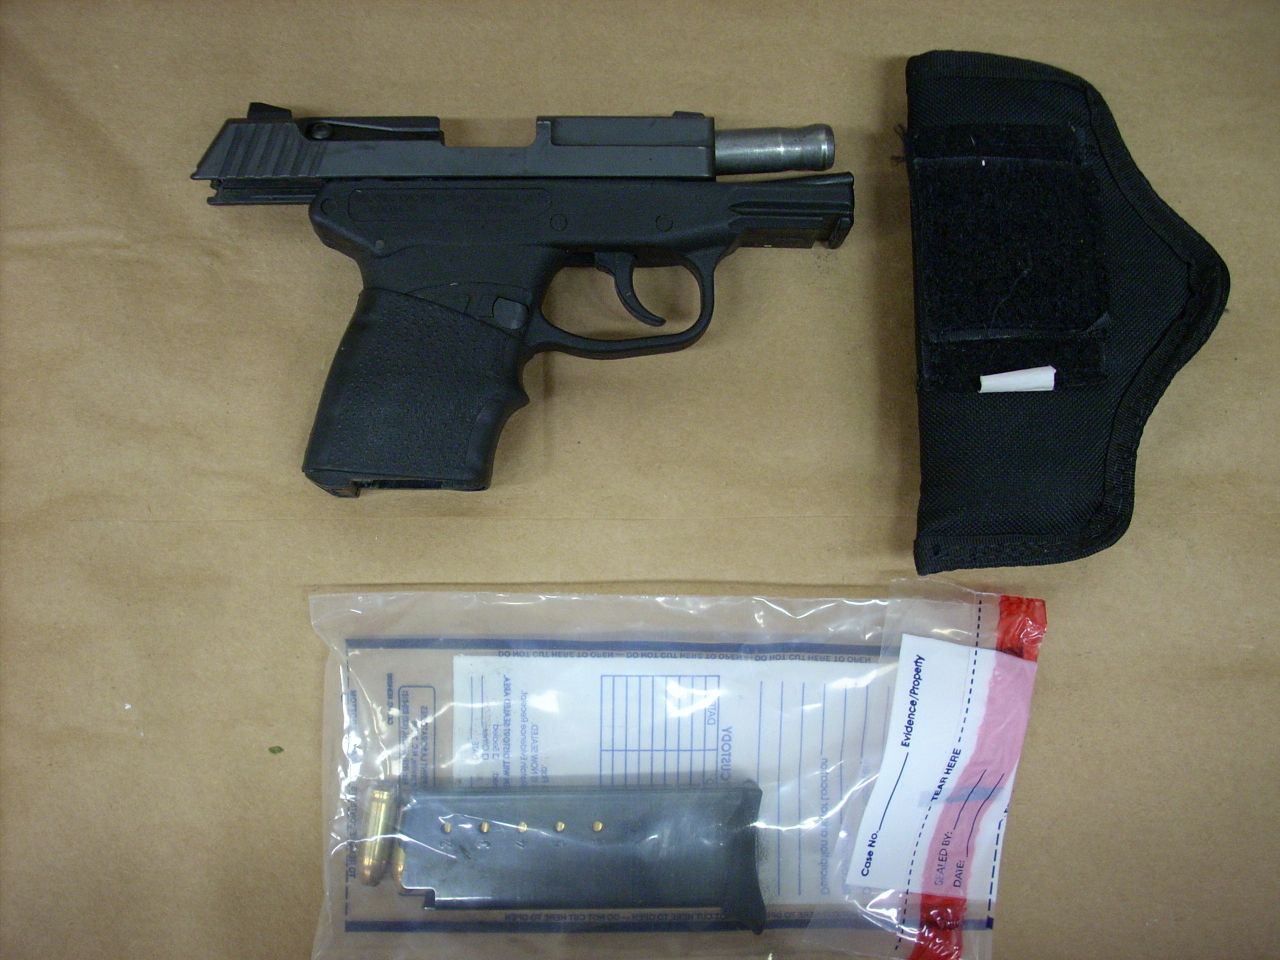 Zimmerman's gun is displayed. The shooting raised questions about gun laws, as well as the merit of the "stand your ground" law in Florida and similar laws in other states.